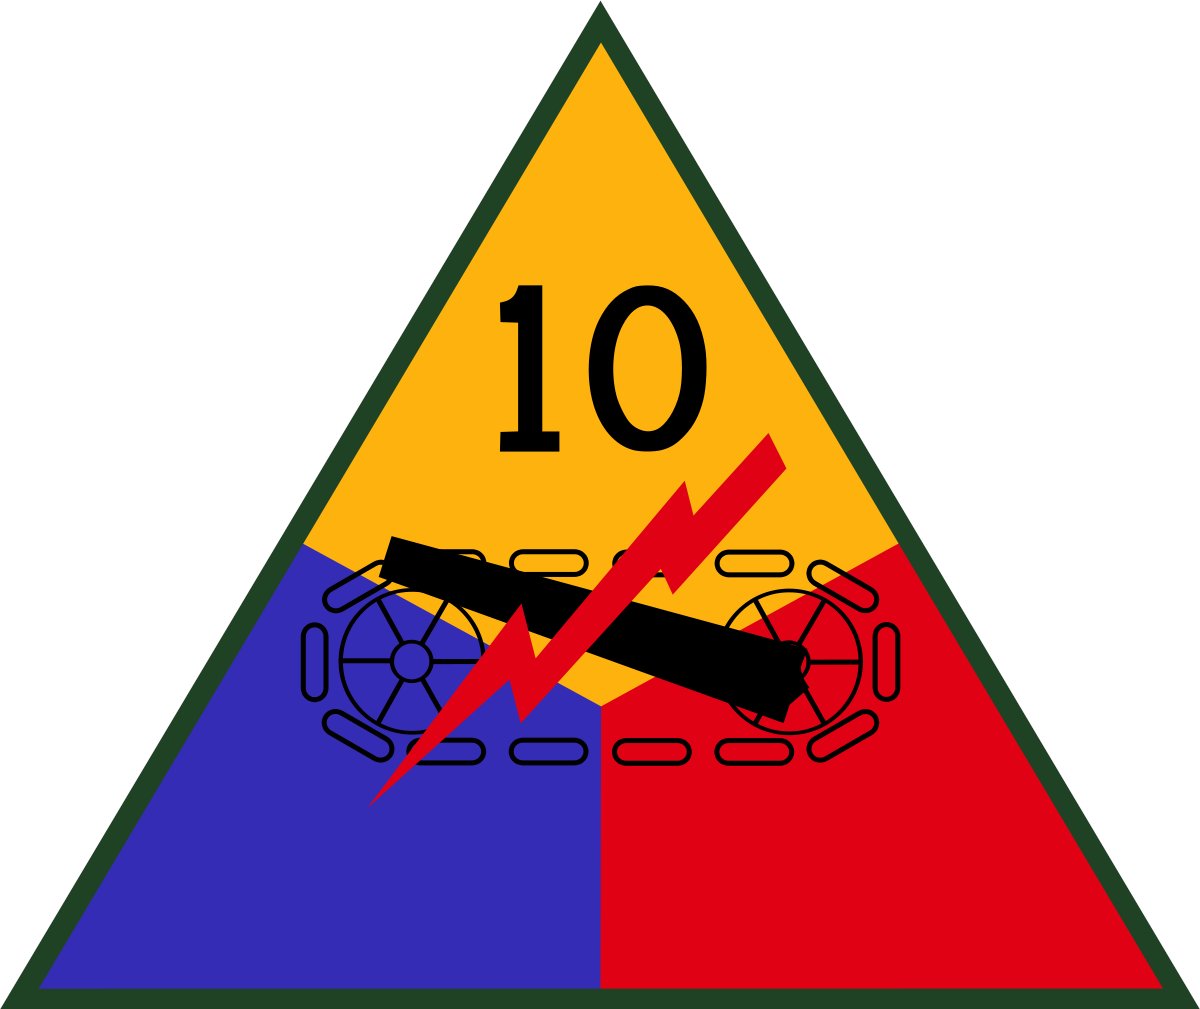 [5 of 9][Footnote: A Combat Command from 3rd Army's 10th Armored Division; what we would now consider ~ a brigade with Sherman Tanks, infantry, half-tracks; arrived in Bastogne BEFORE the 101st Airborne, so we should consider the amount of credit we give the 101st in Bastogne.]